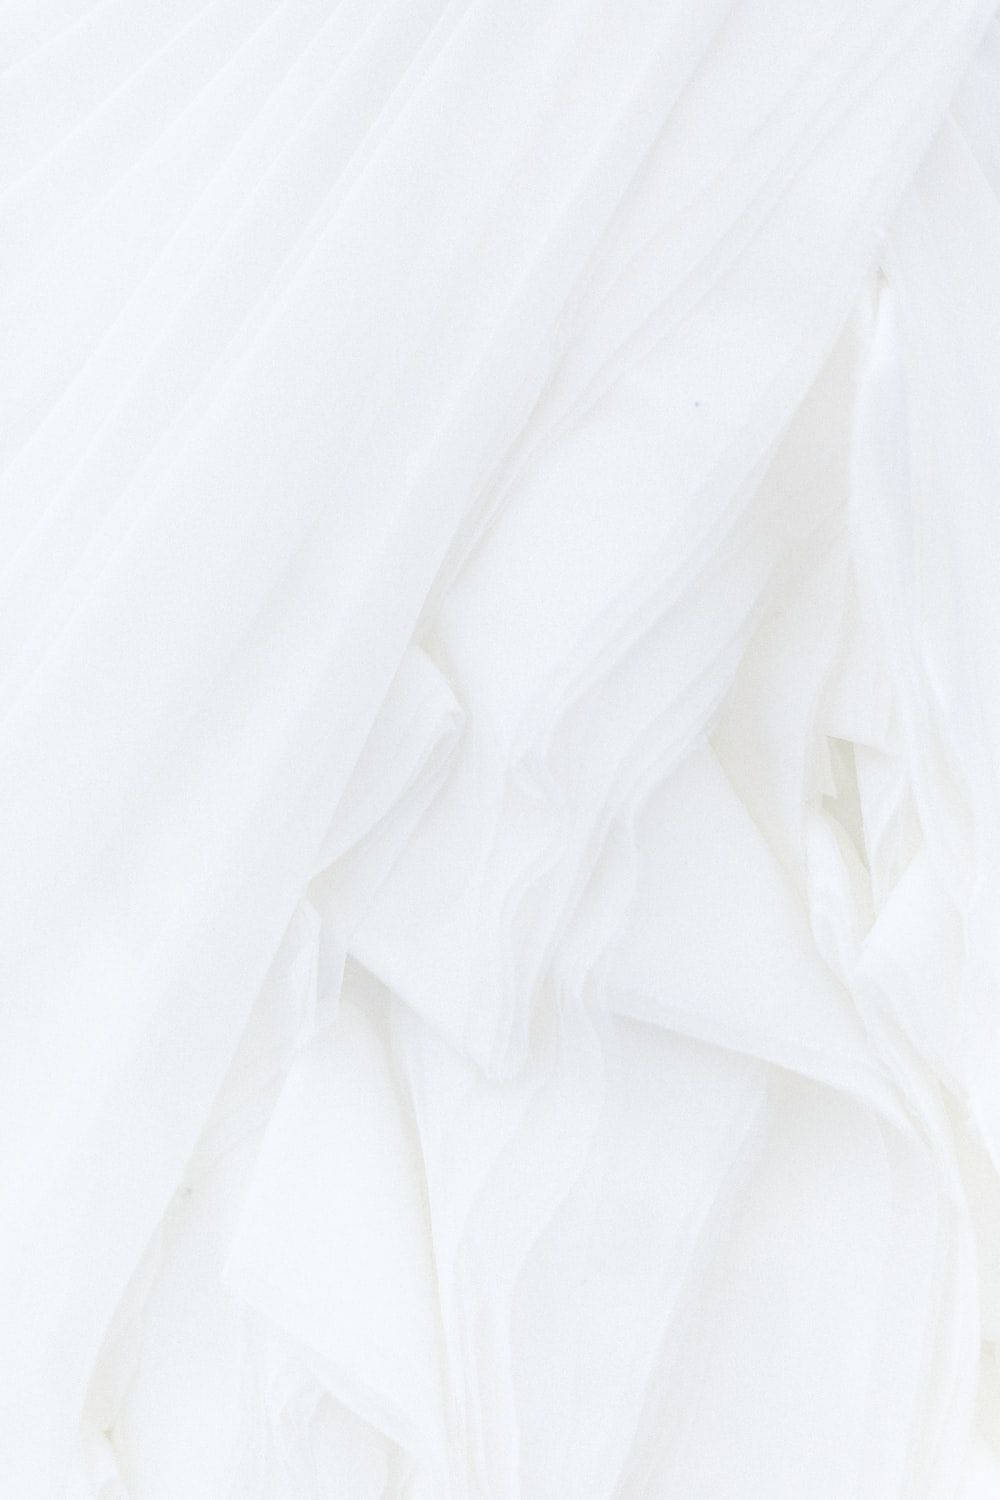 All White Fabric With Uneven Folds Wallpaper